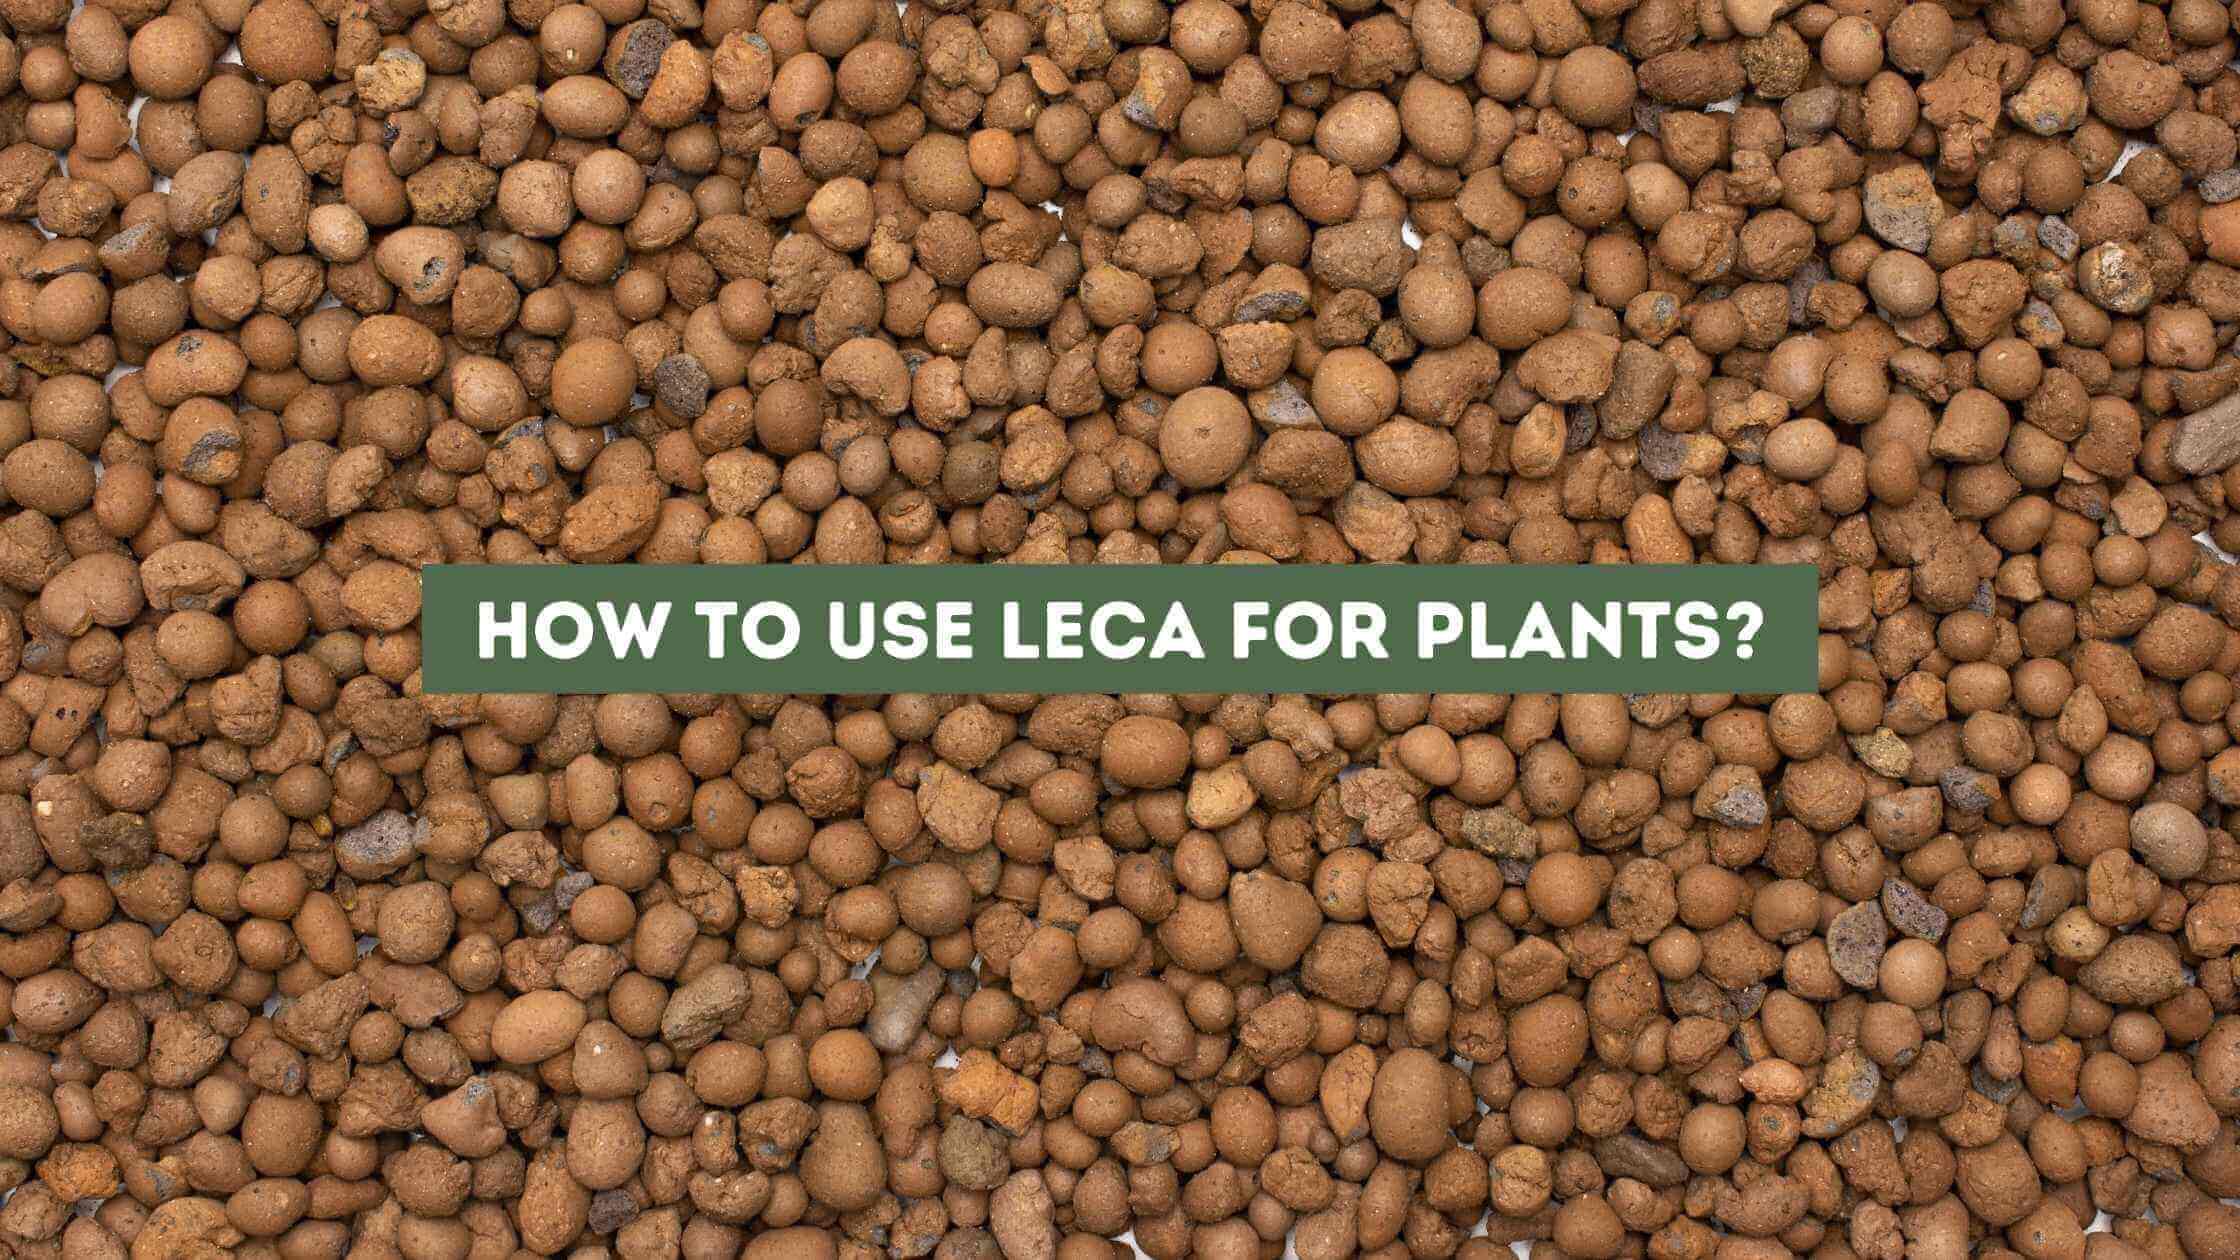 How to Use Leca for Plants